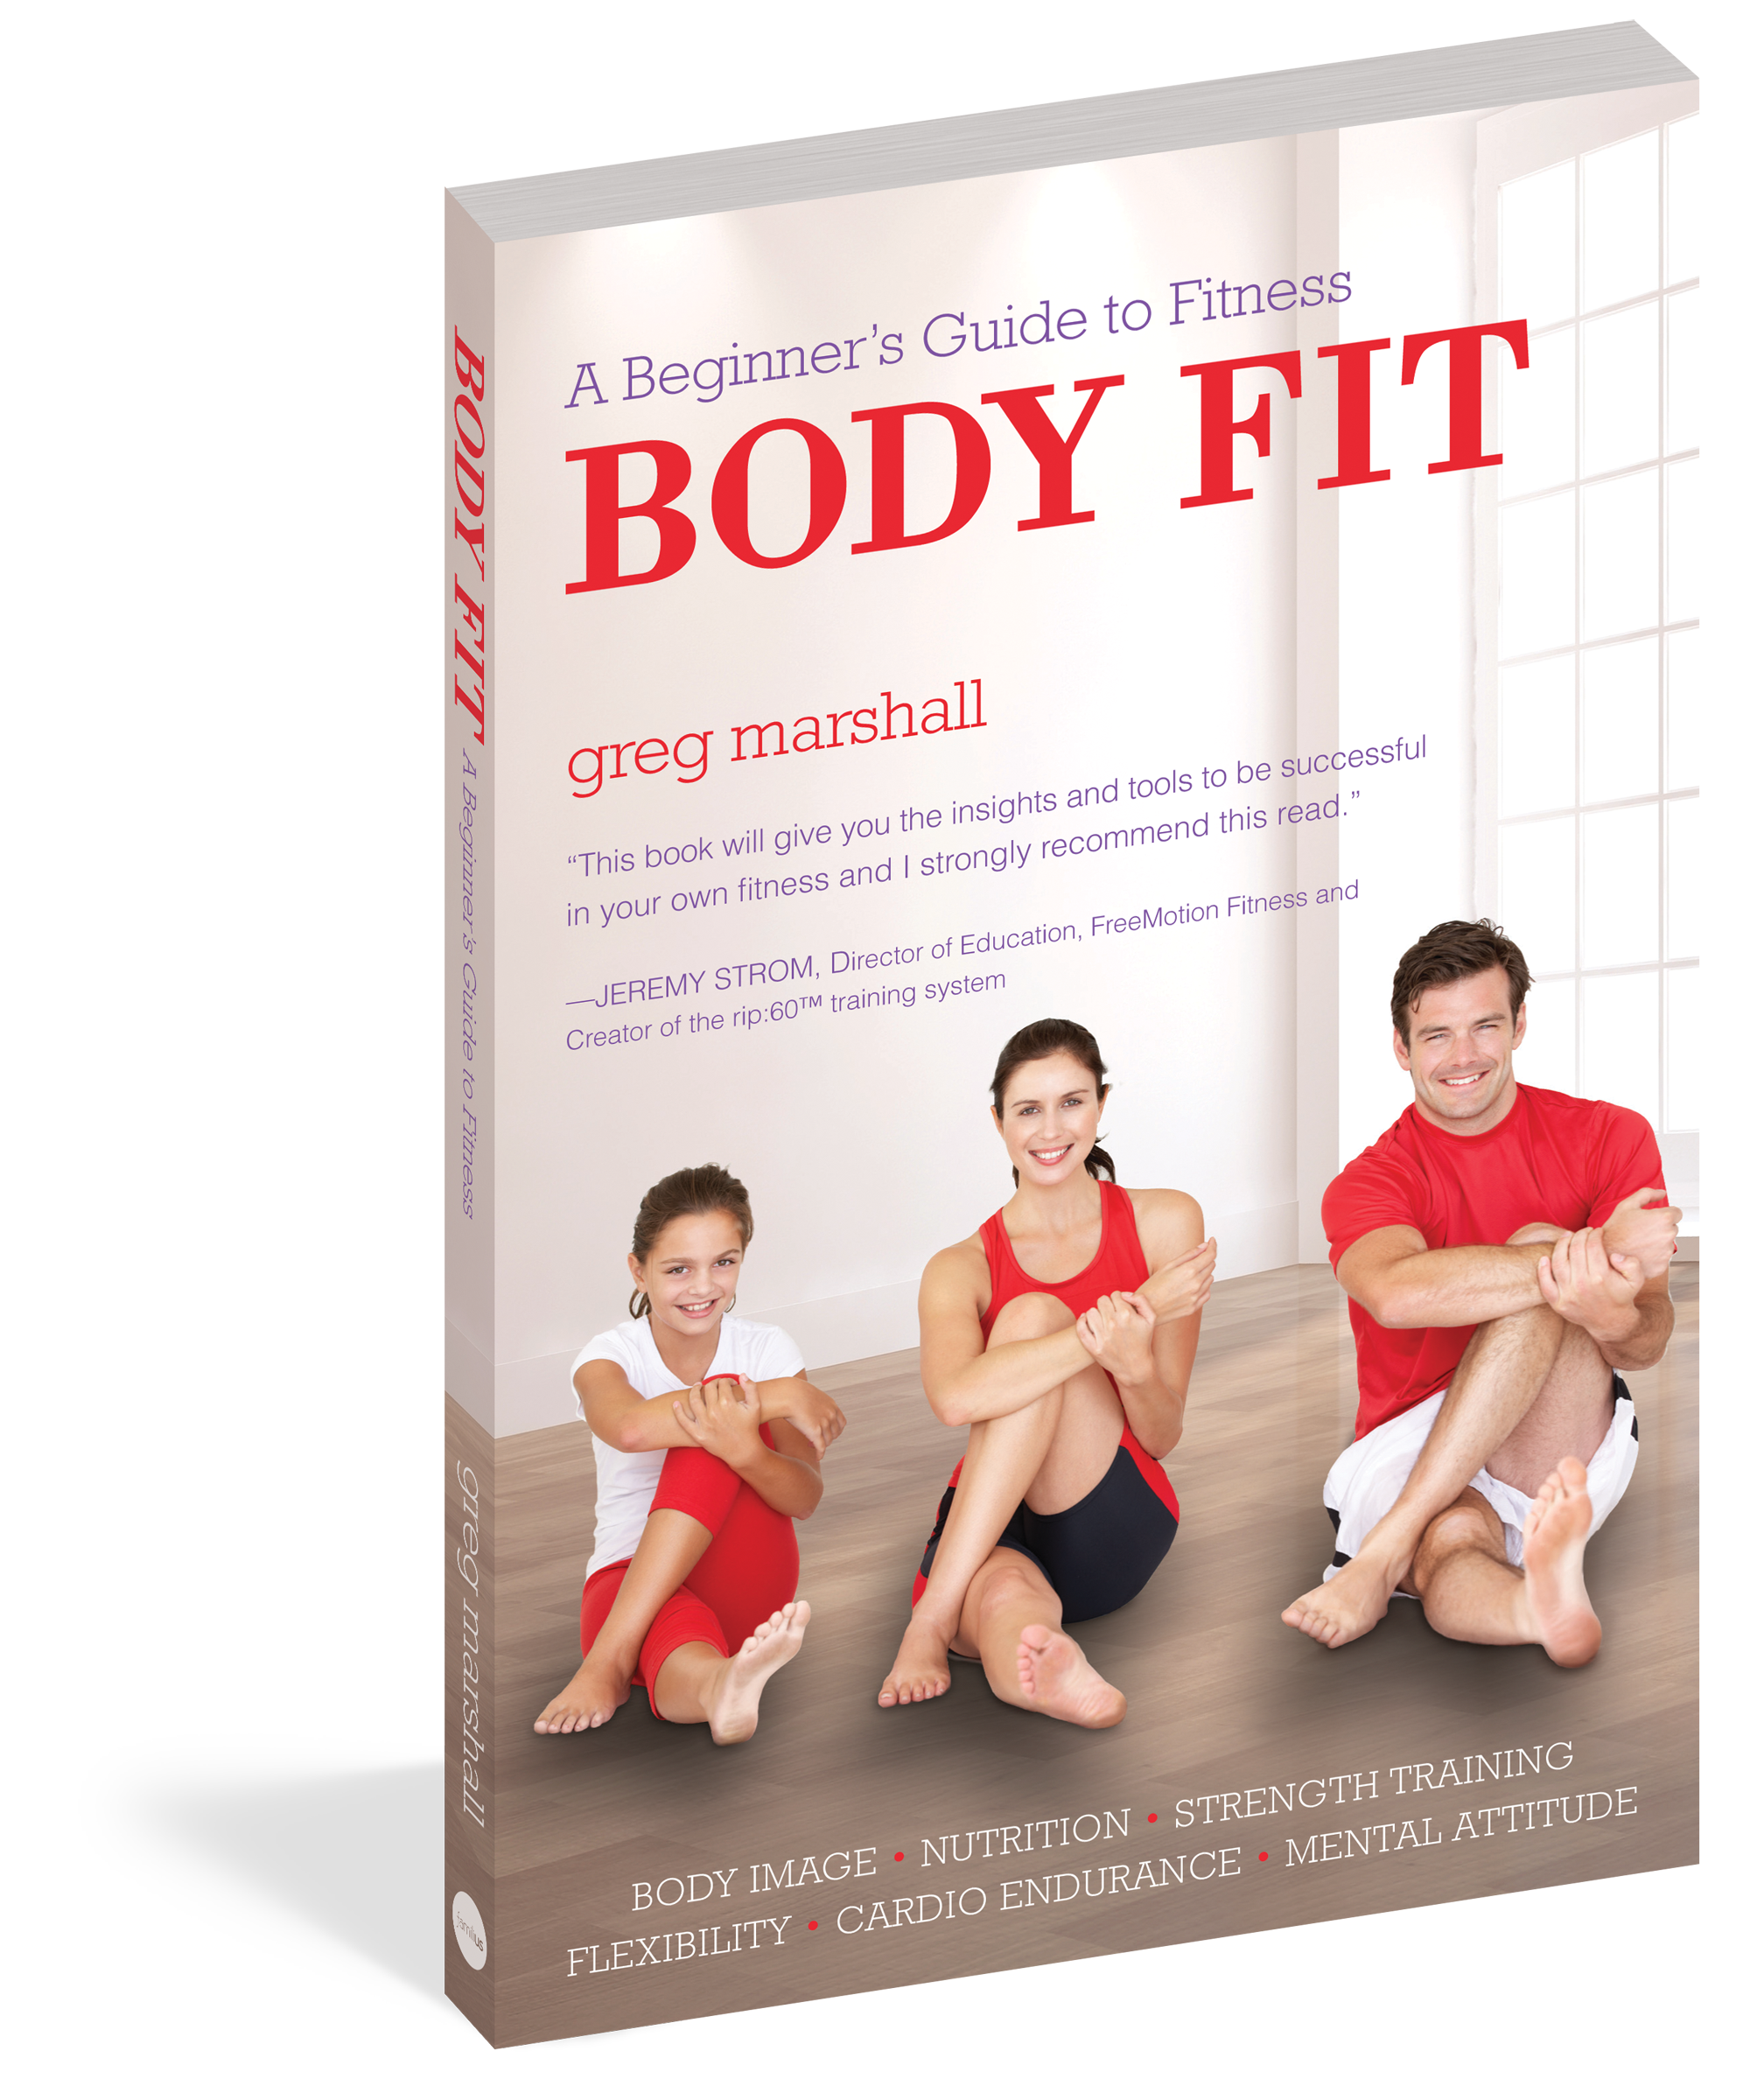 The cover of the book Body Fit.